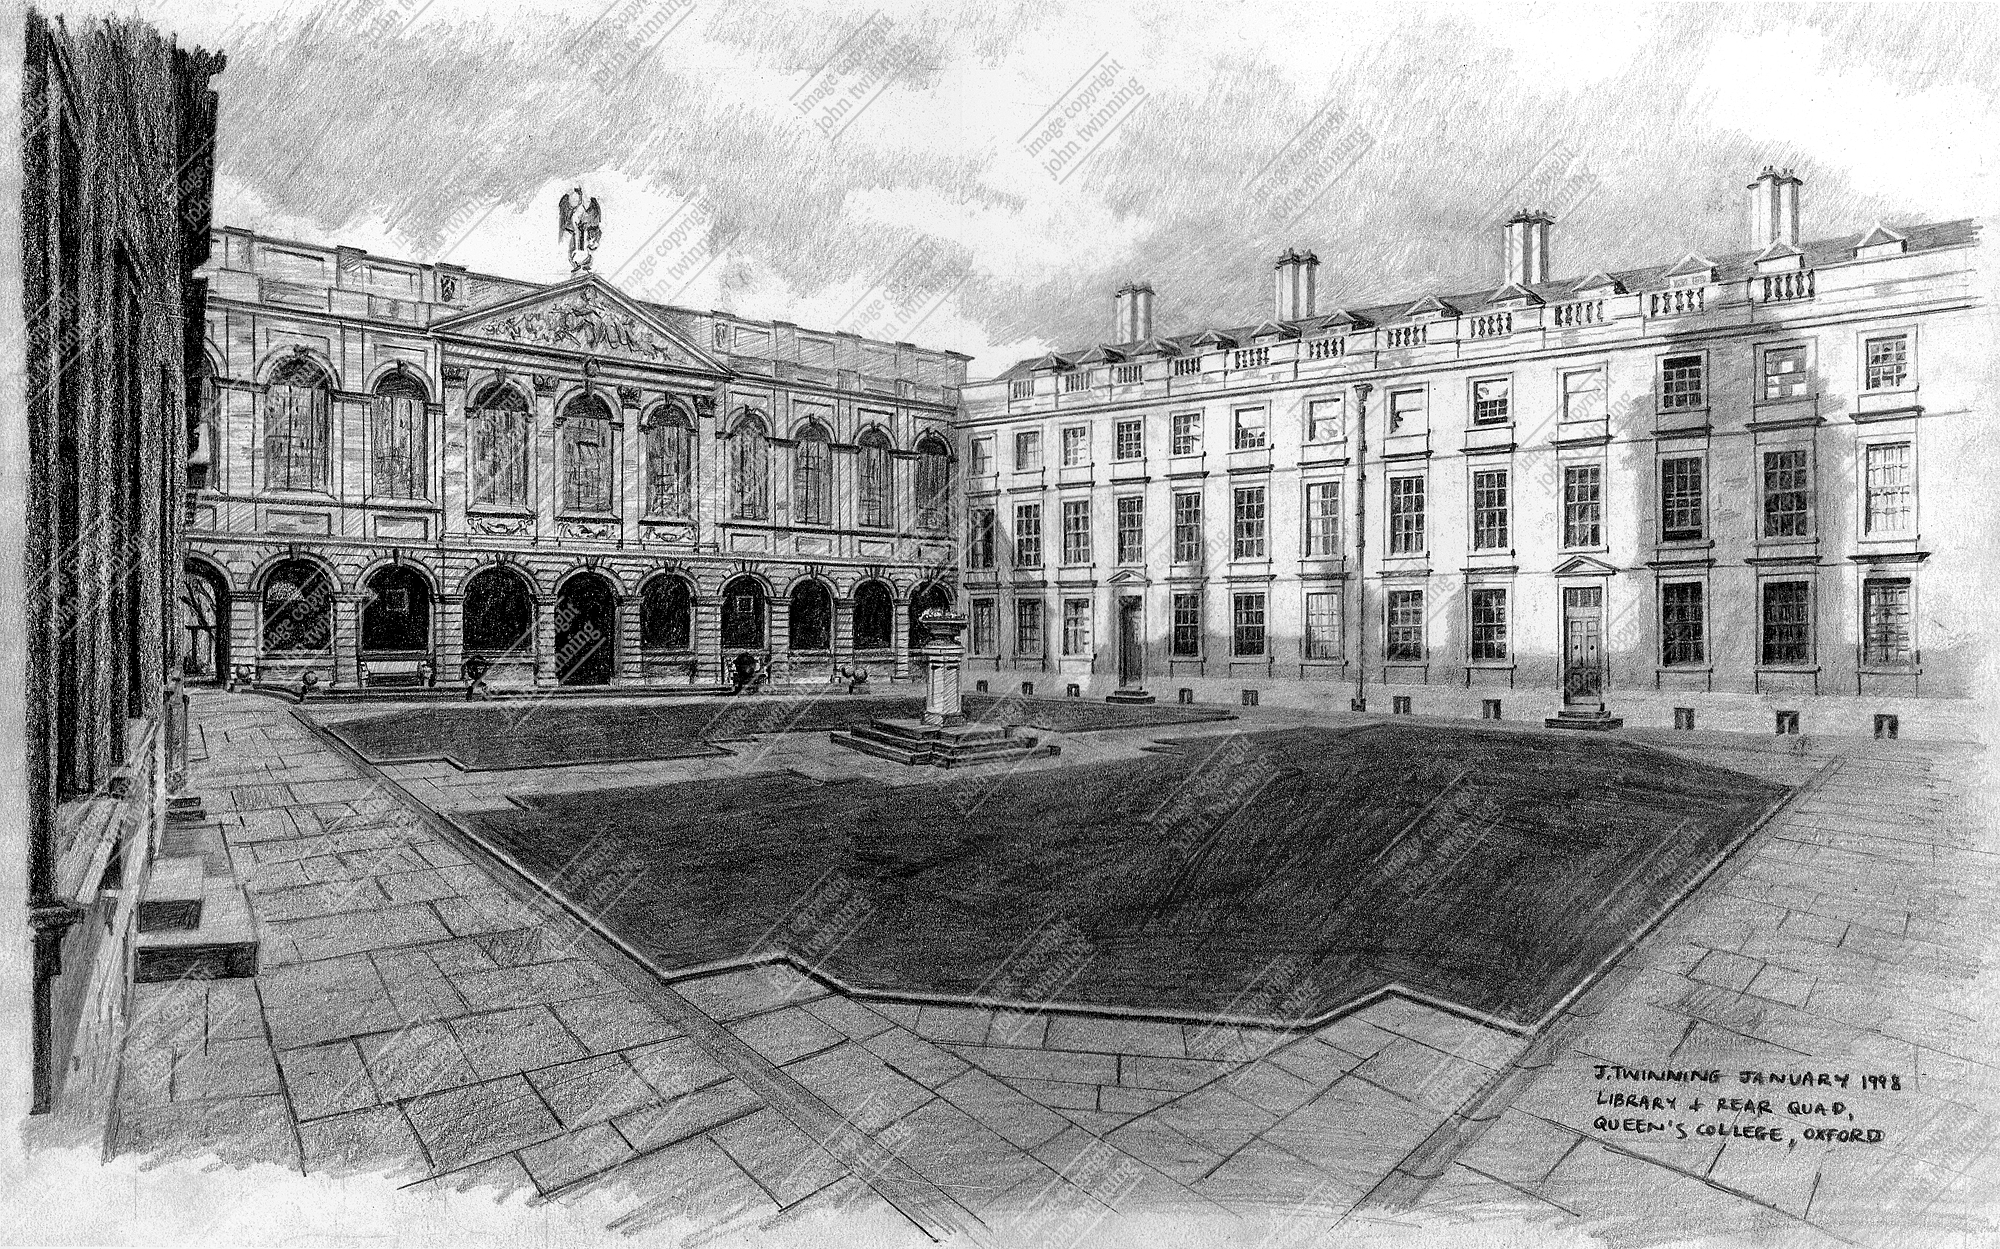 ‘The Back Quad’ – art print from a pencil drawing of this view within the grounds of the queen’s college, oxford